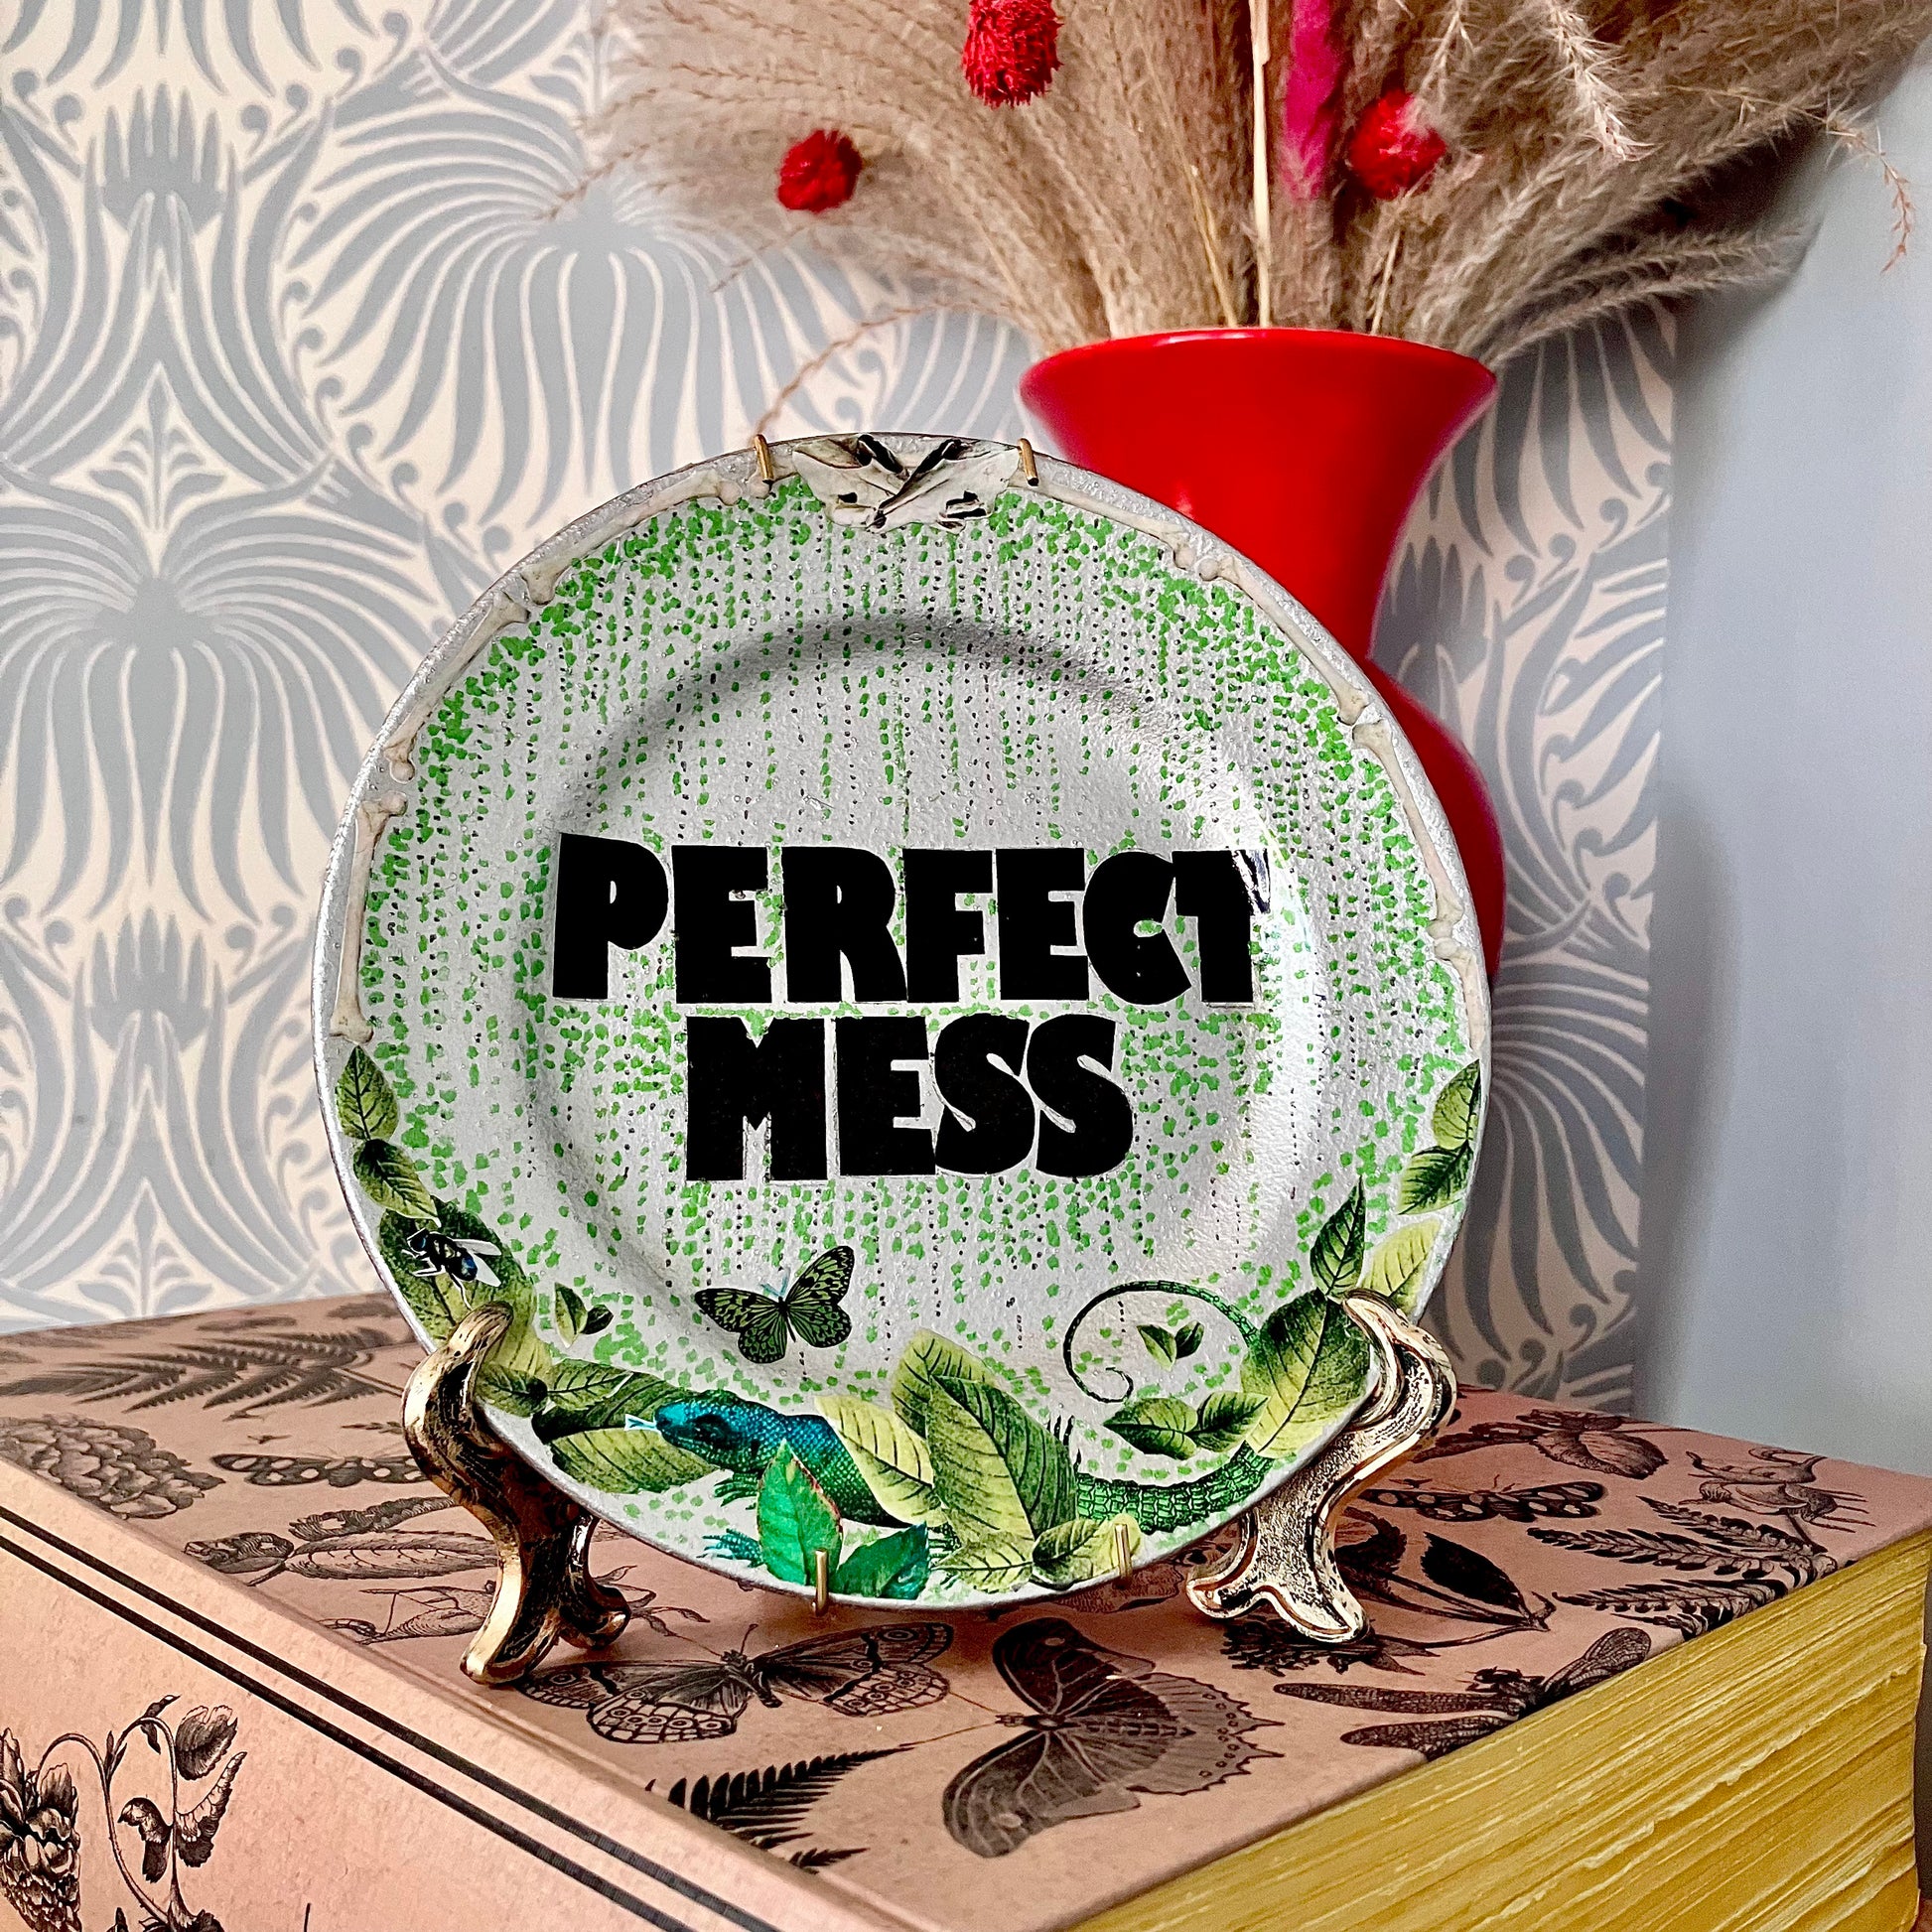 "Perfect Mess" Wall Plate by House of Frisson, on a plate stand, resting on a bookshelf.